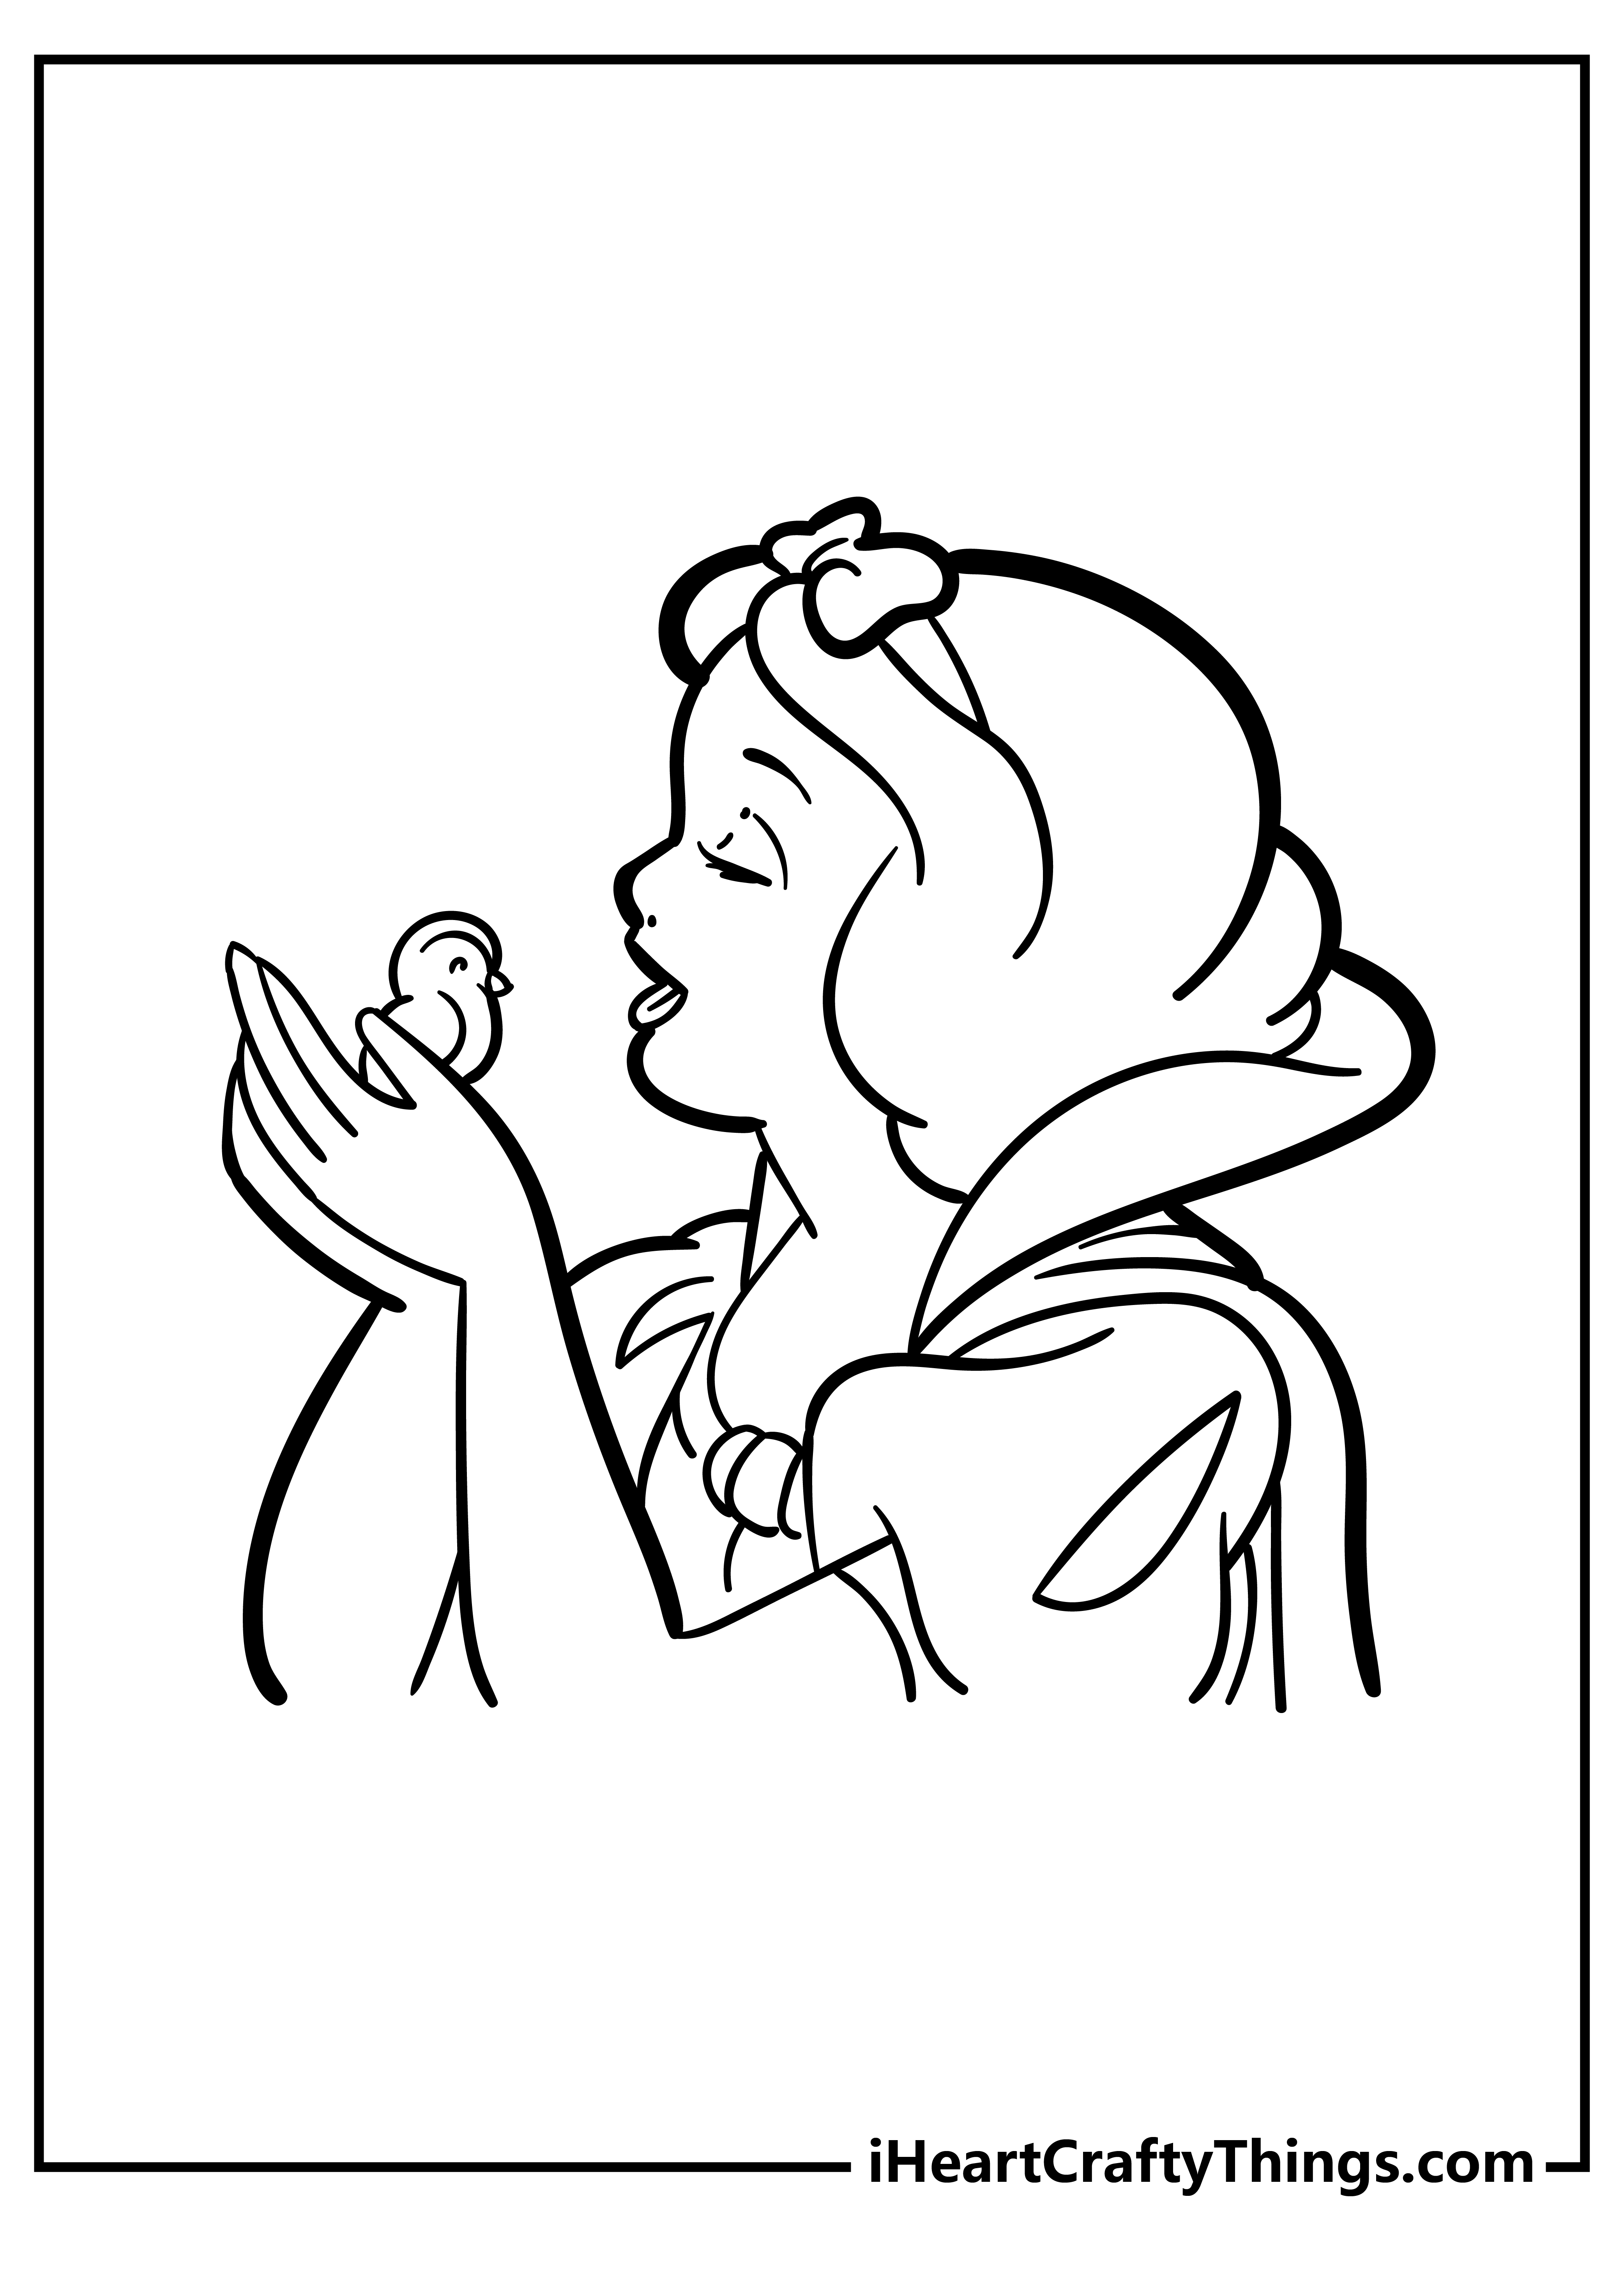 Snow White Coloring Pages free pdf download